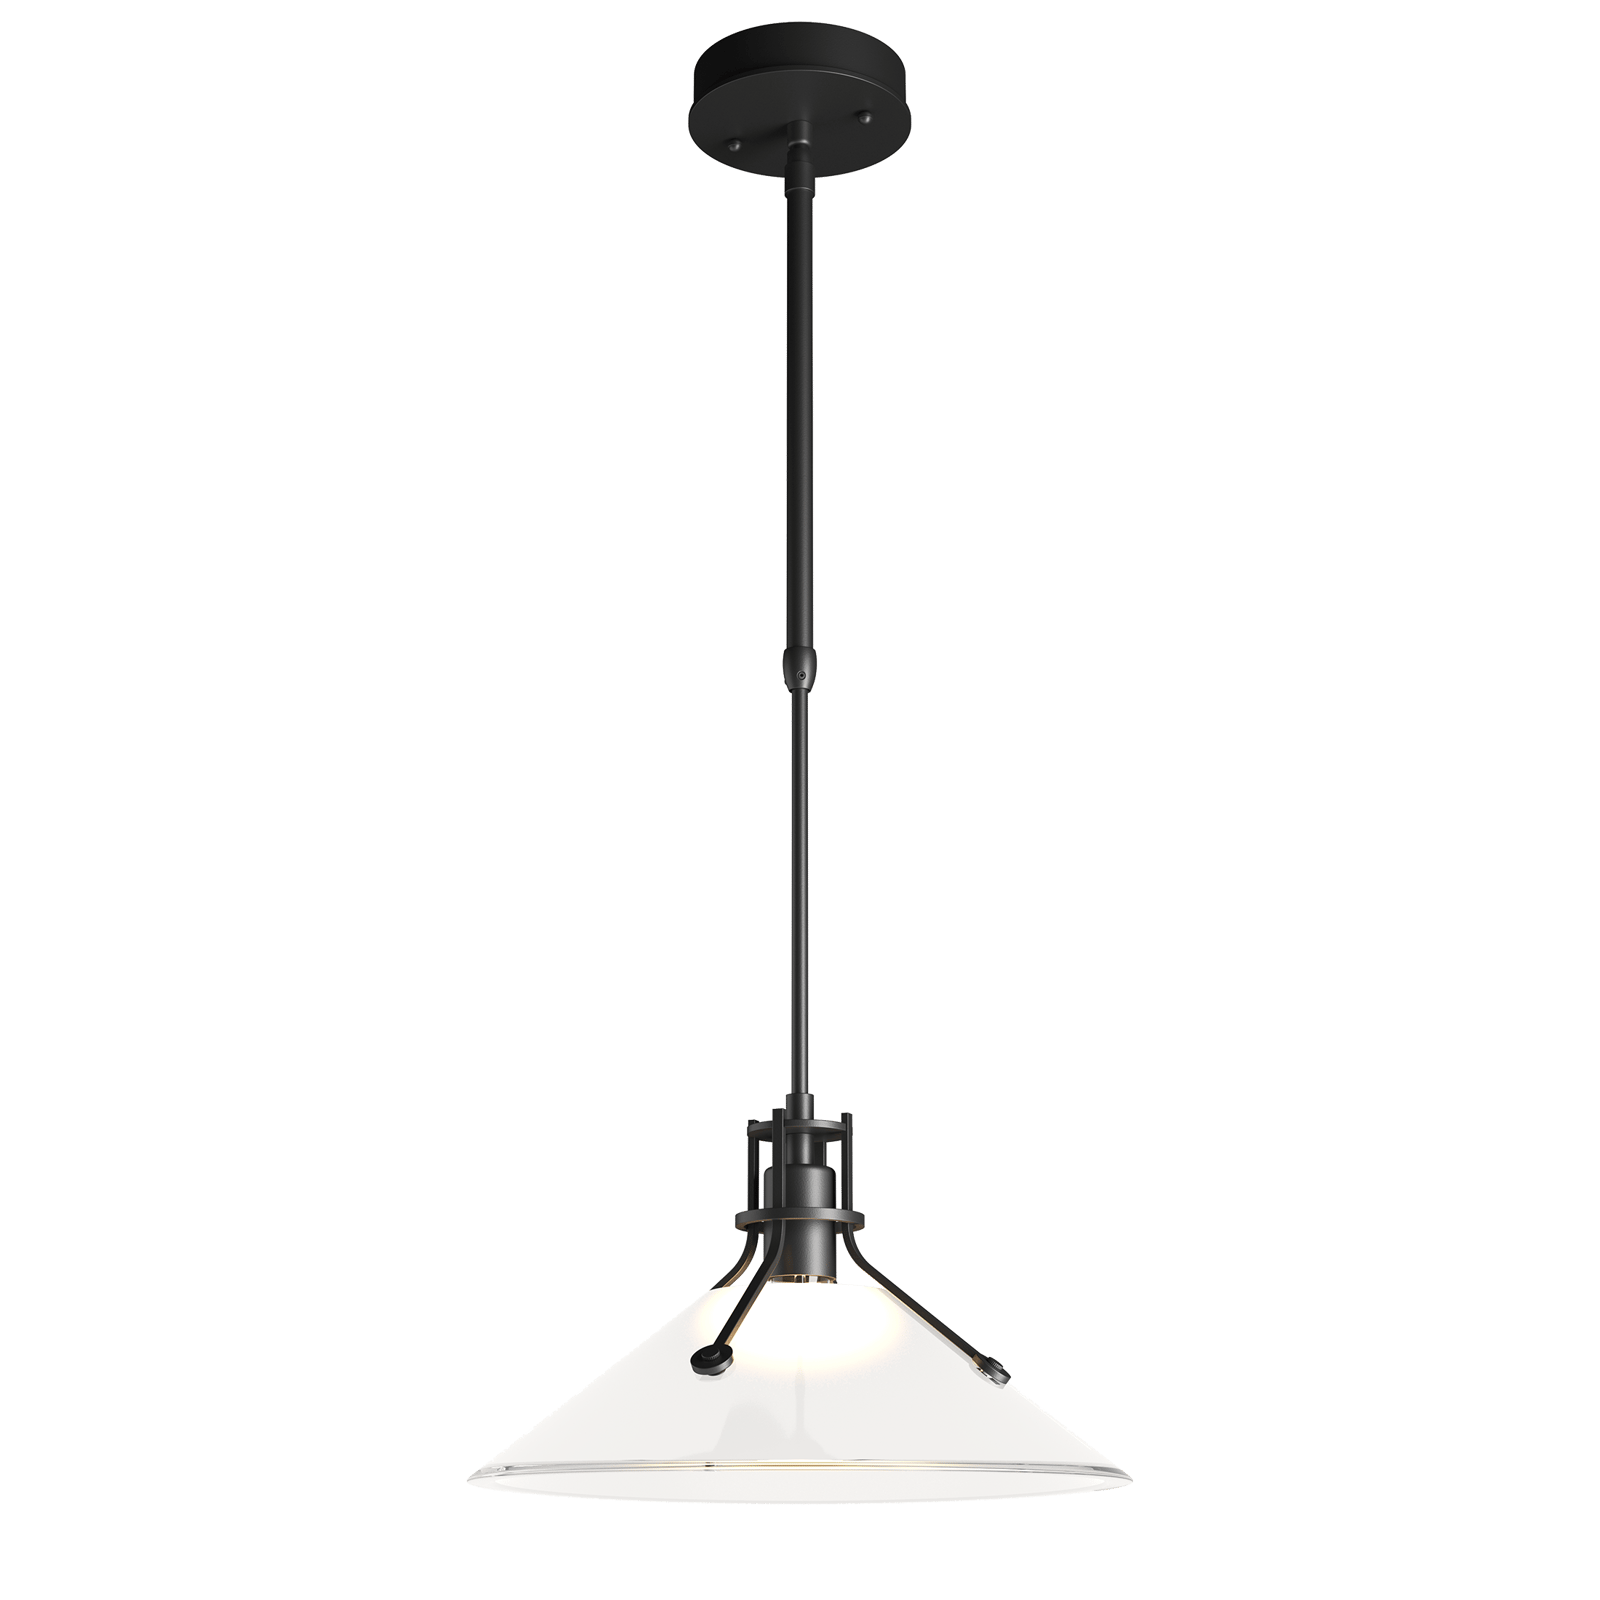 Hubbardton Forge Henry Outdoor Pendant with Glass Medium Outdoor Light Fixture l Hanging Hubbardton Forge Coastal Black Frosted Glass (FD) 